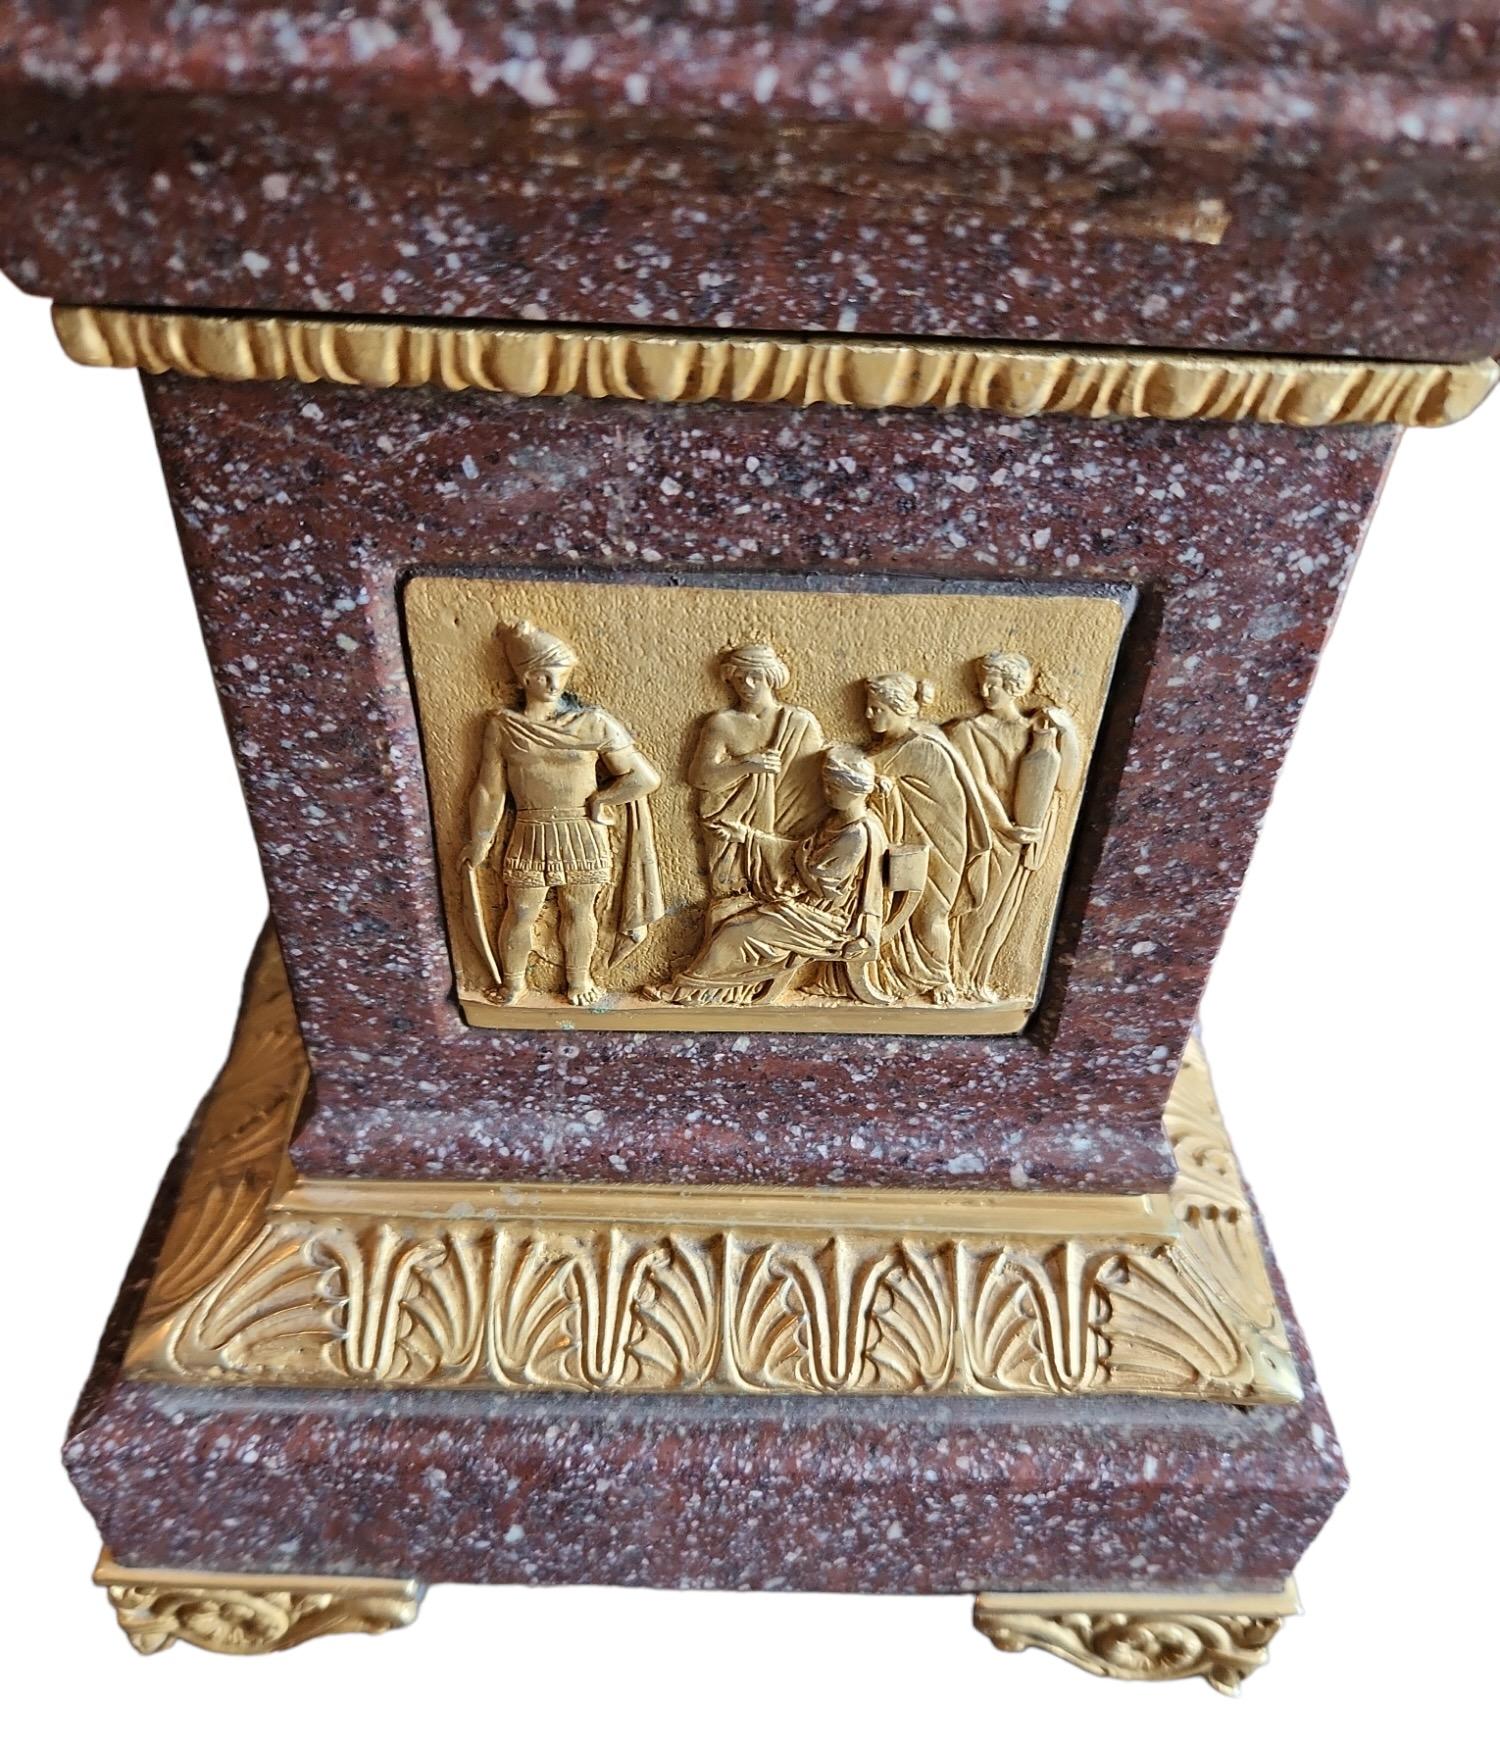 The marble could possibly be porphyry.  Nice dore bronze castings.   1950s to 1960s.